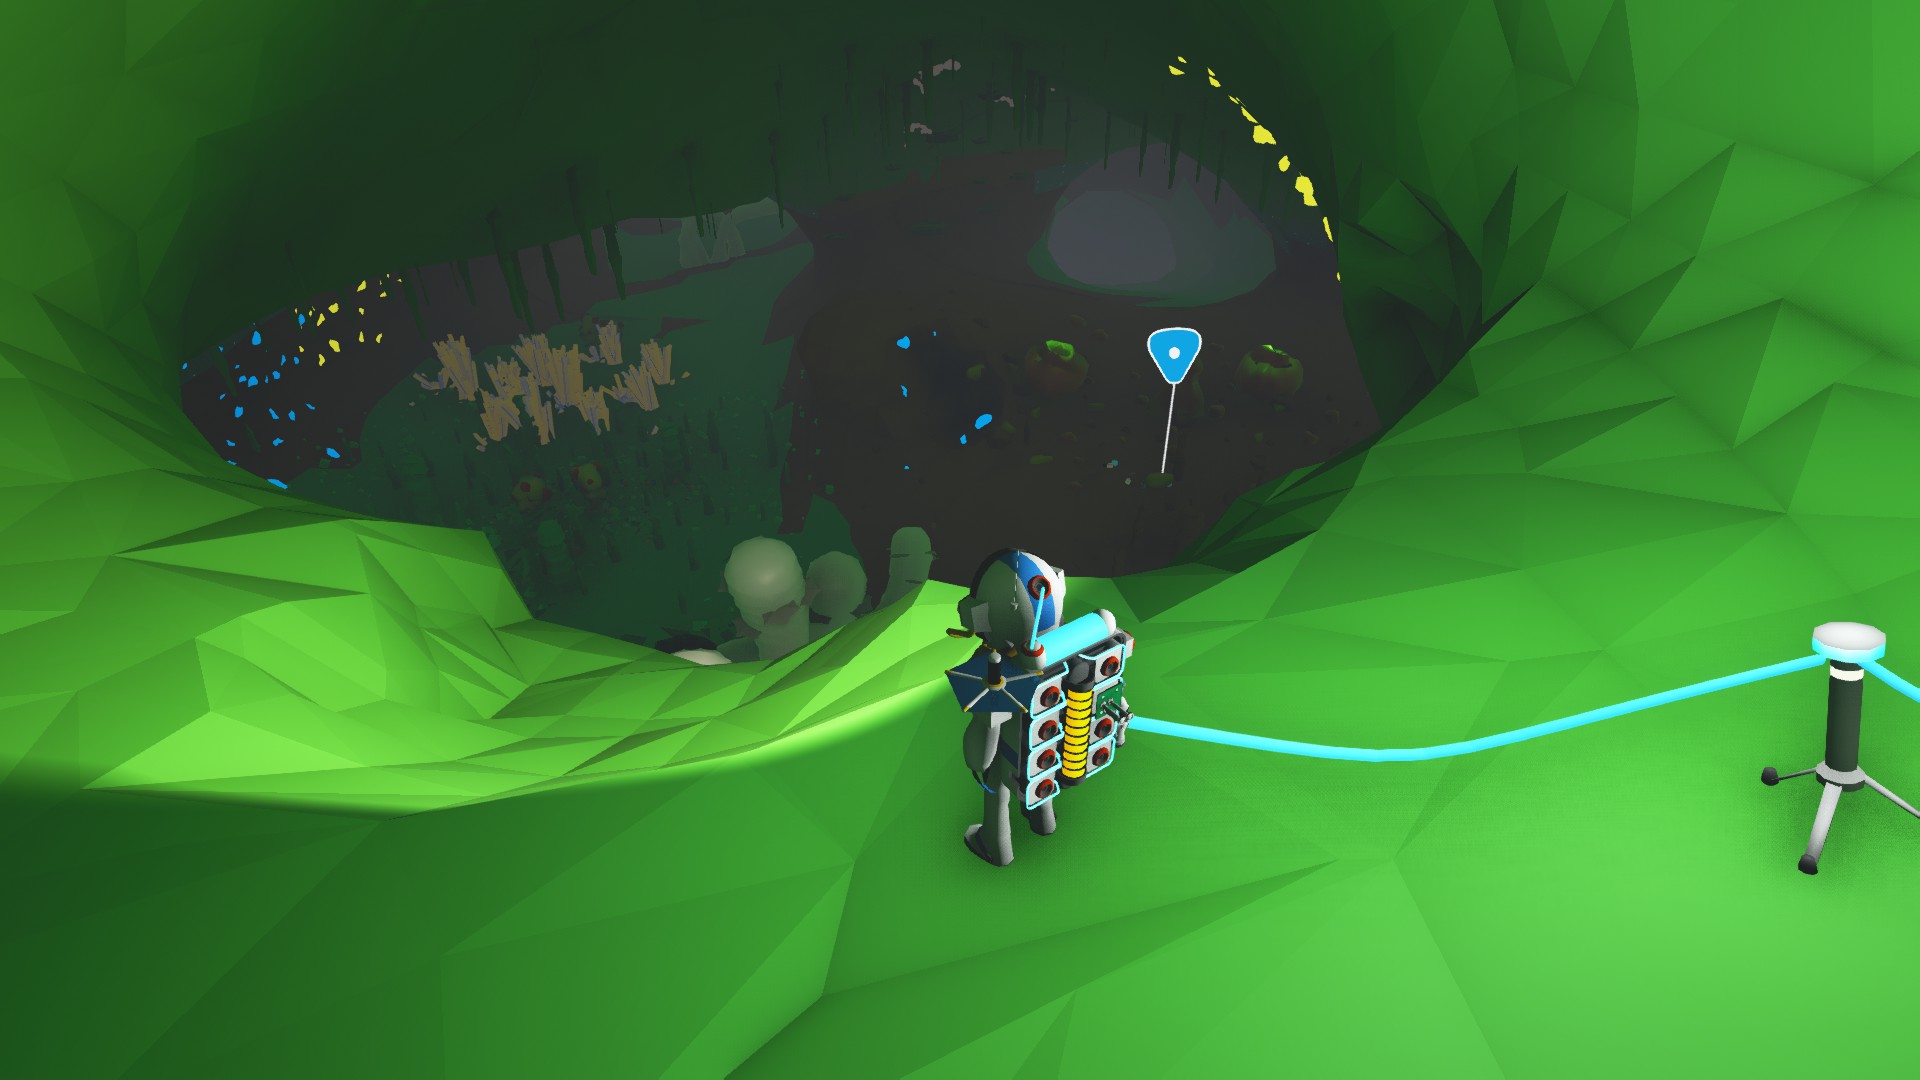 Space Survival Game Astroneer Will Kill You In All The Best Ways